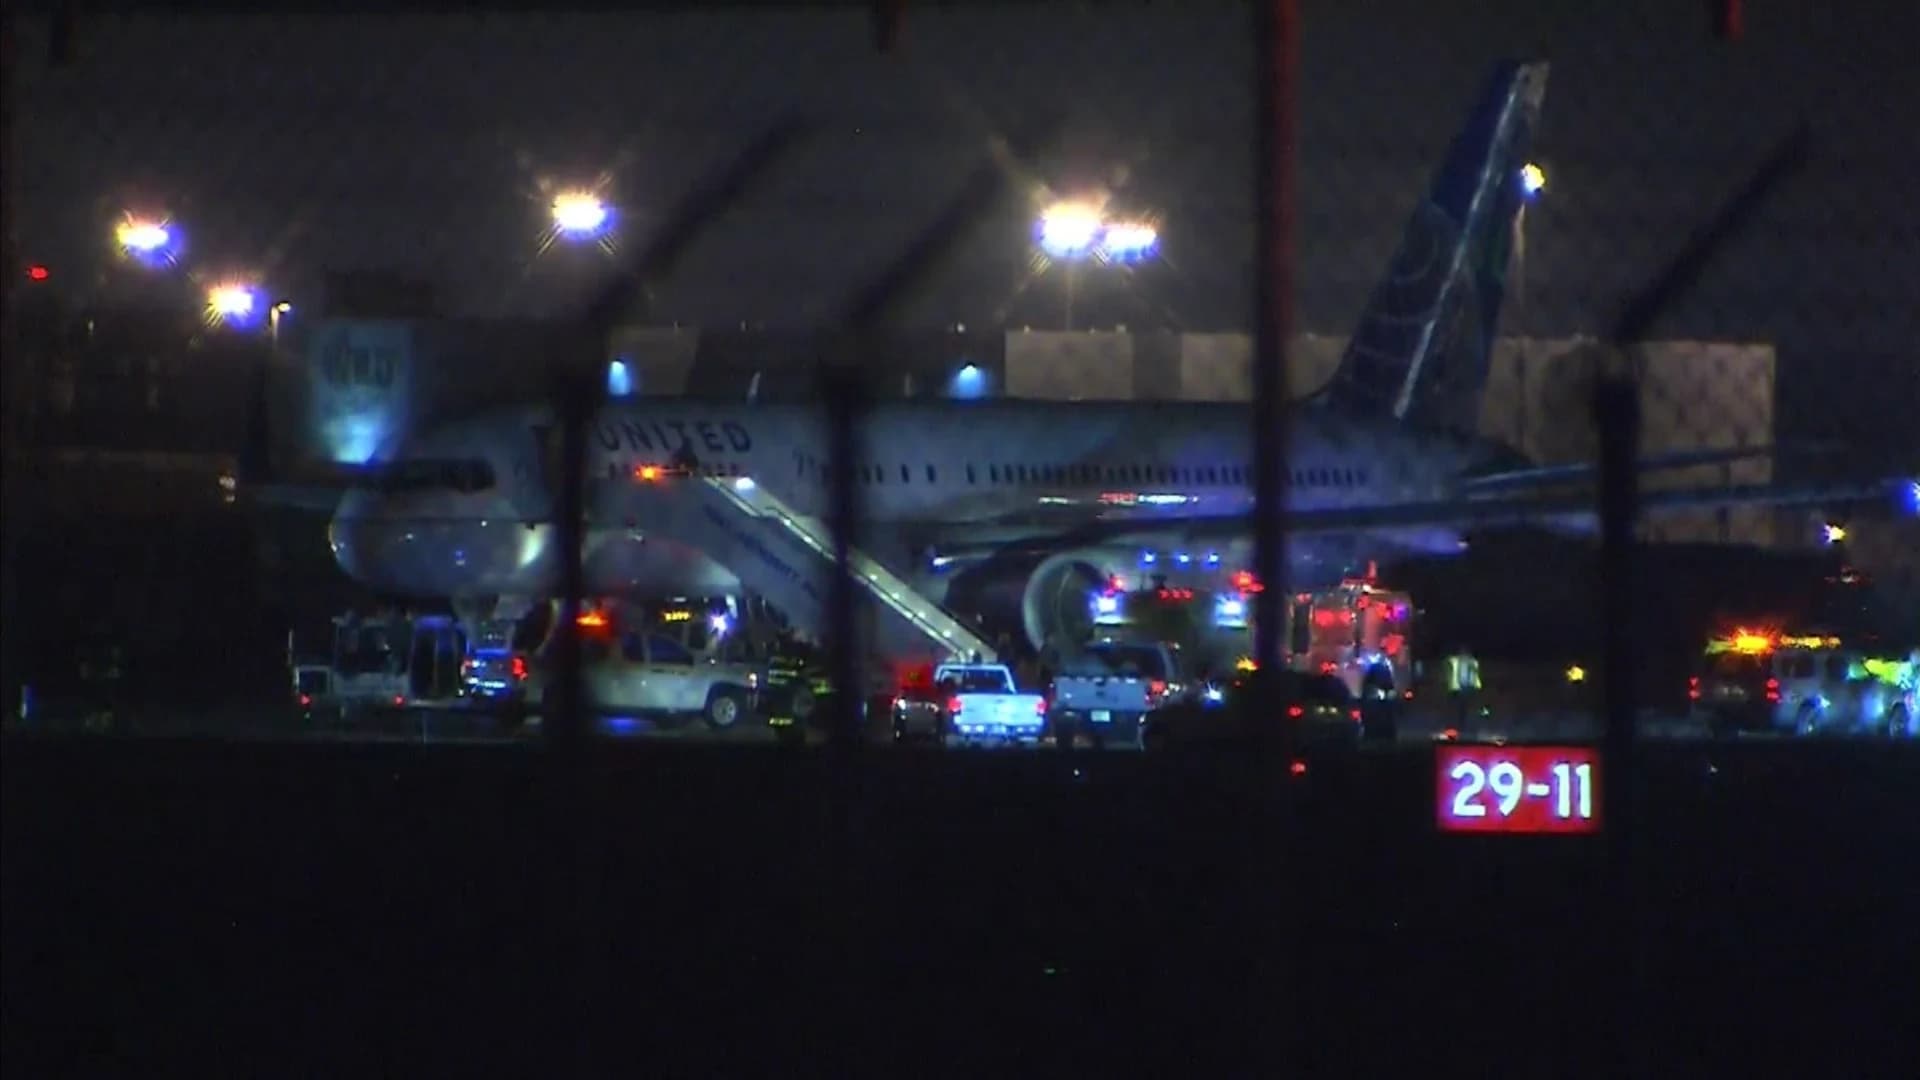 Newark Liberty Airport reopens after engine fire forces evacuation